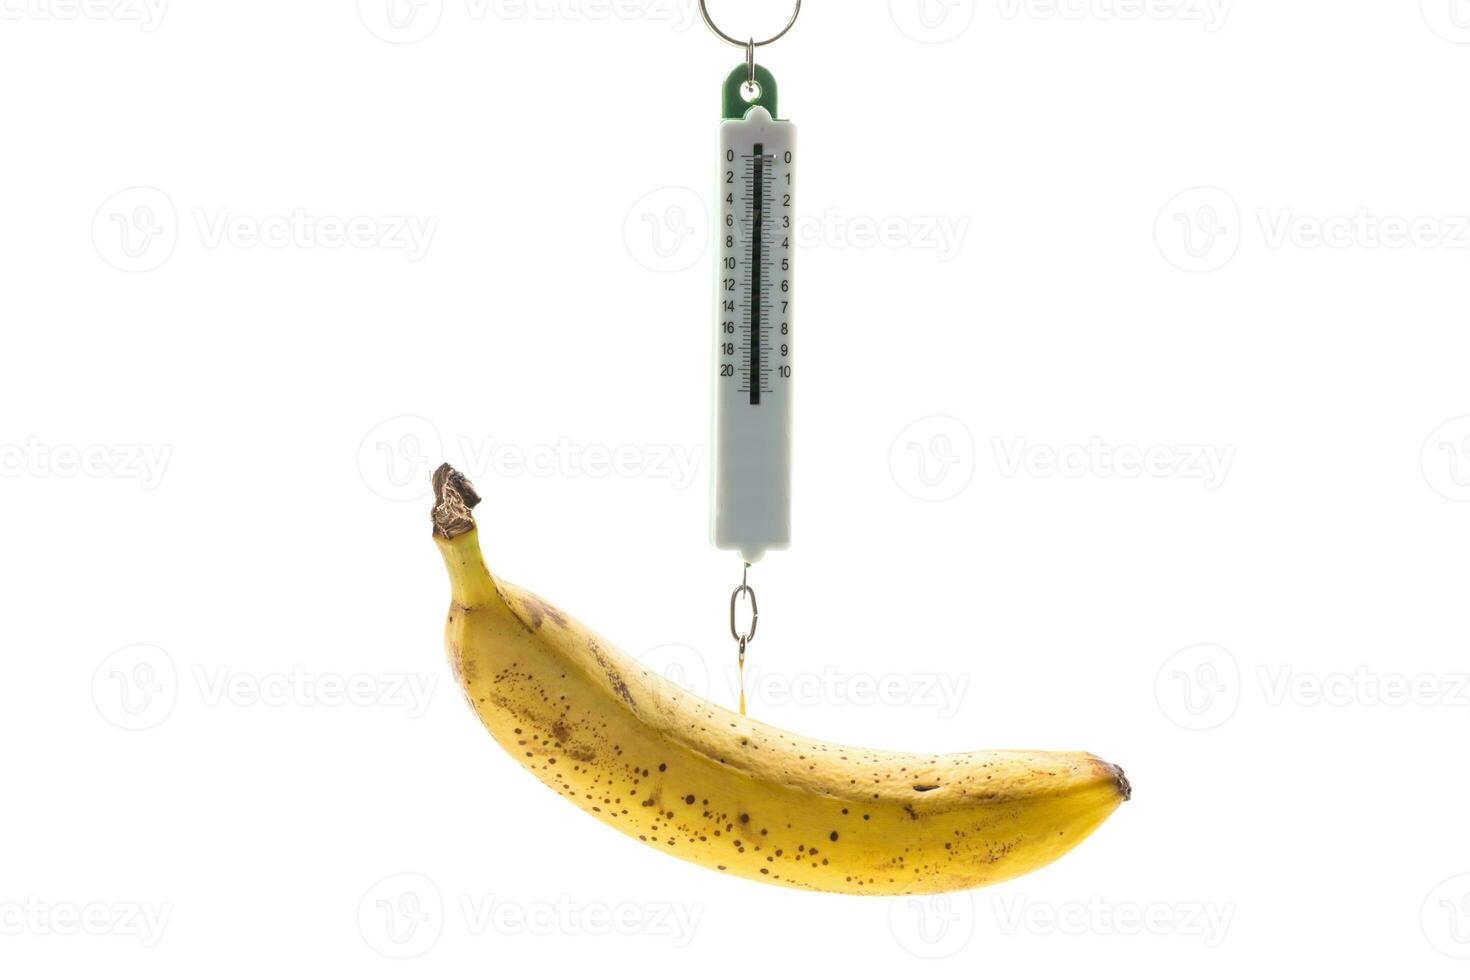 ripe yellow banana hanging on old style scales photo